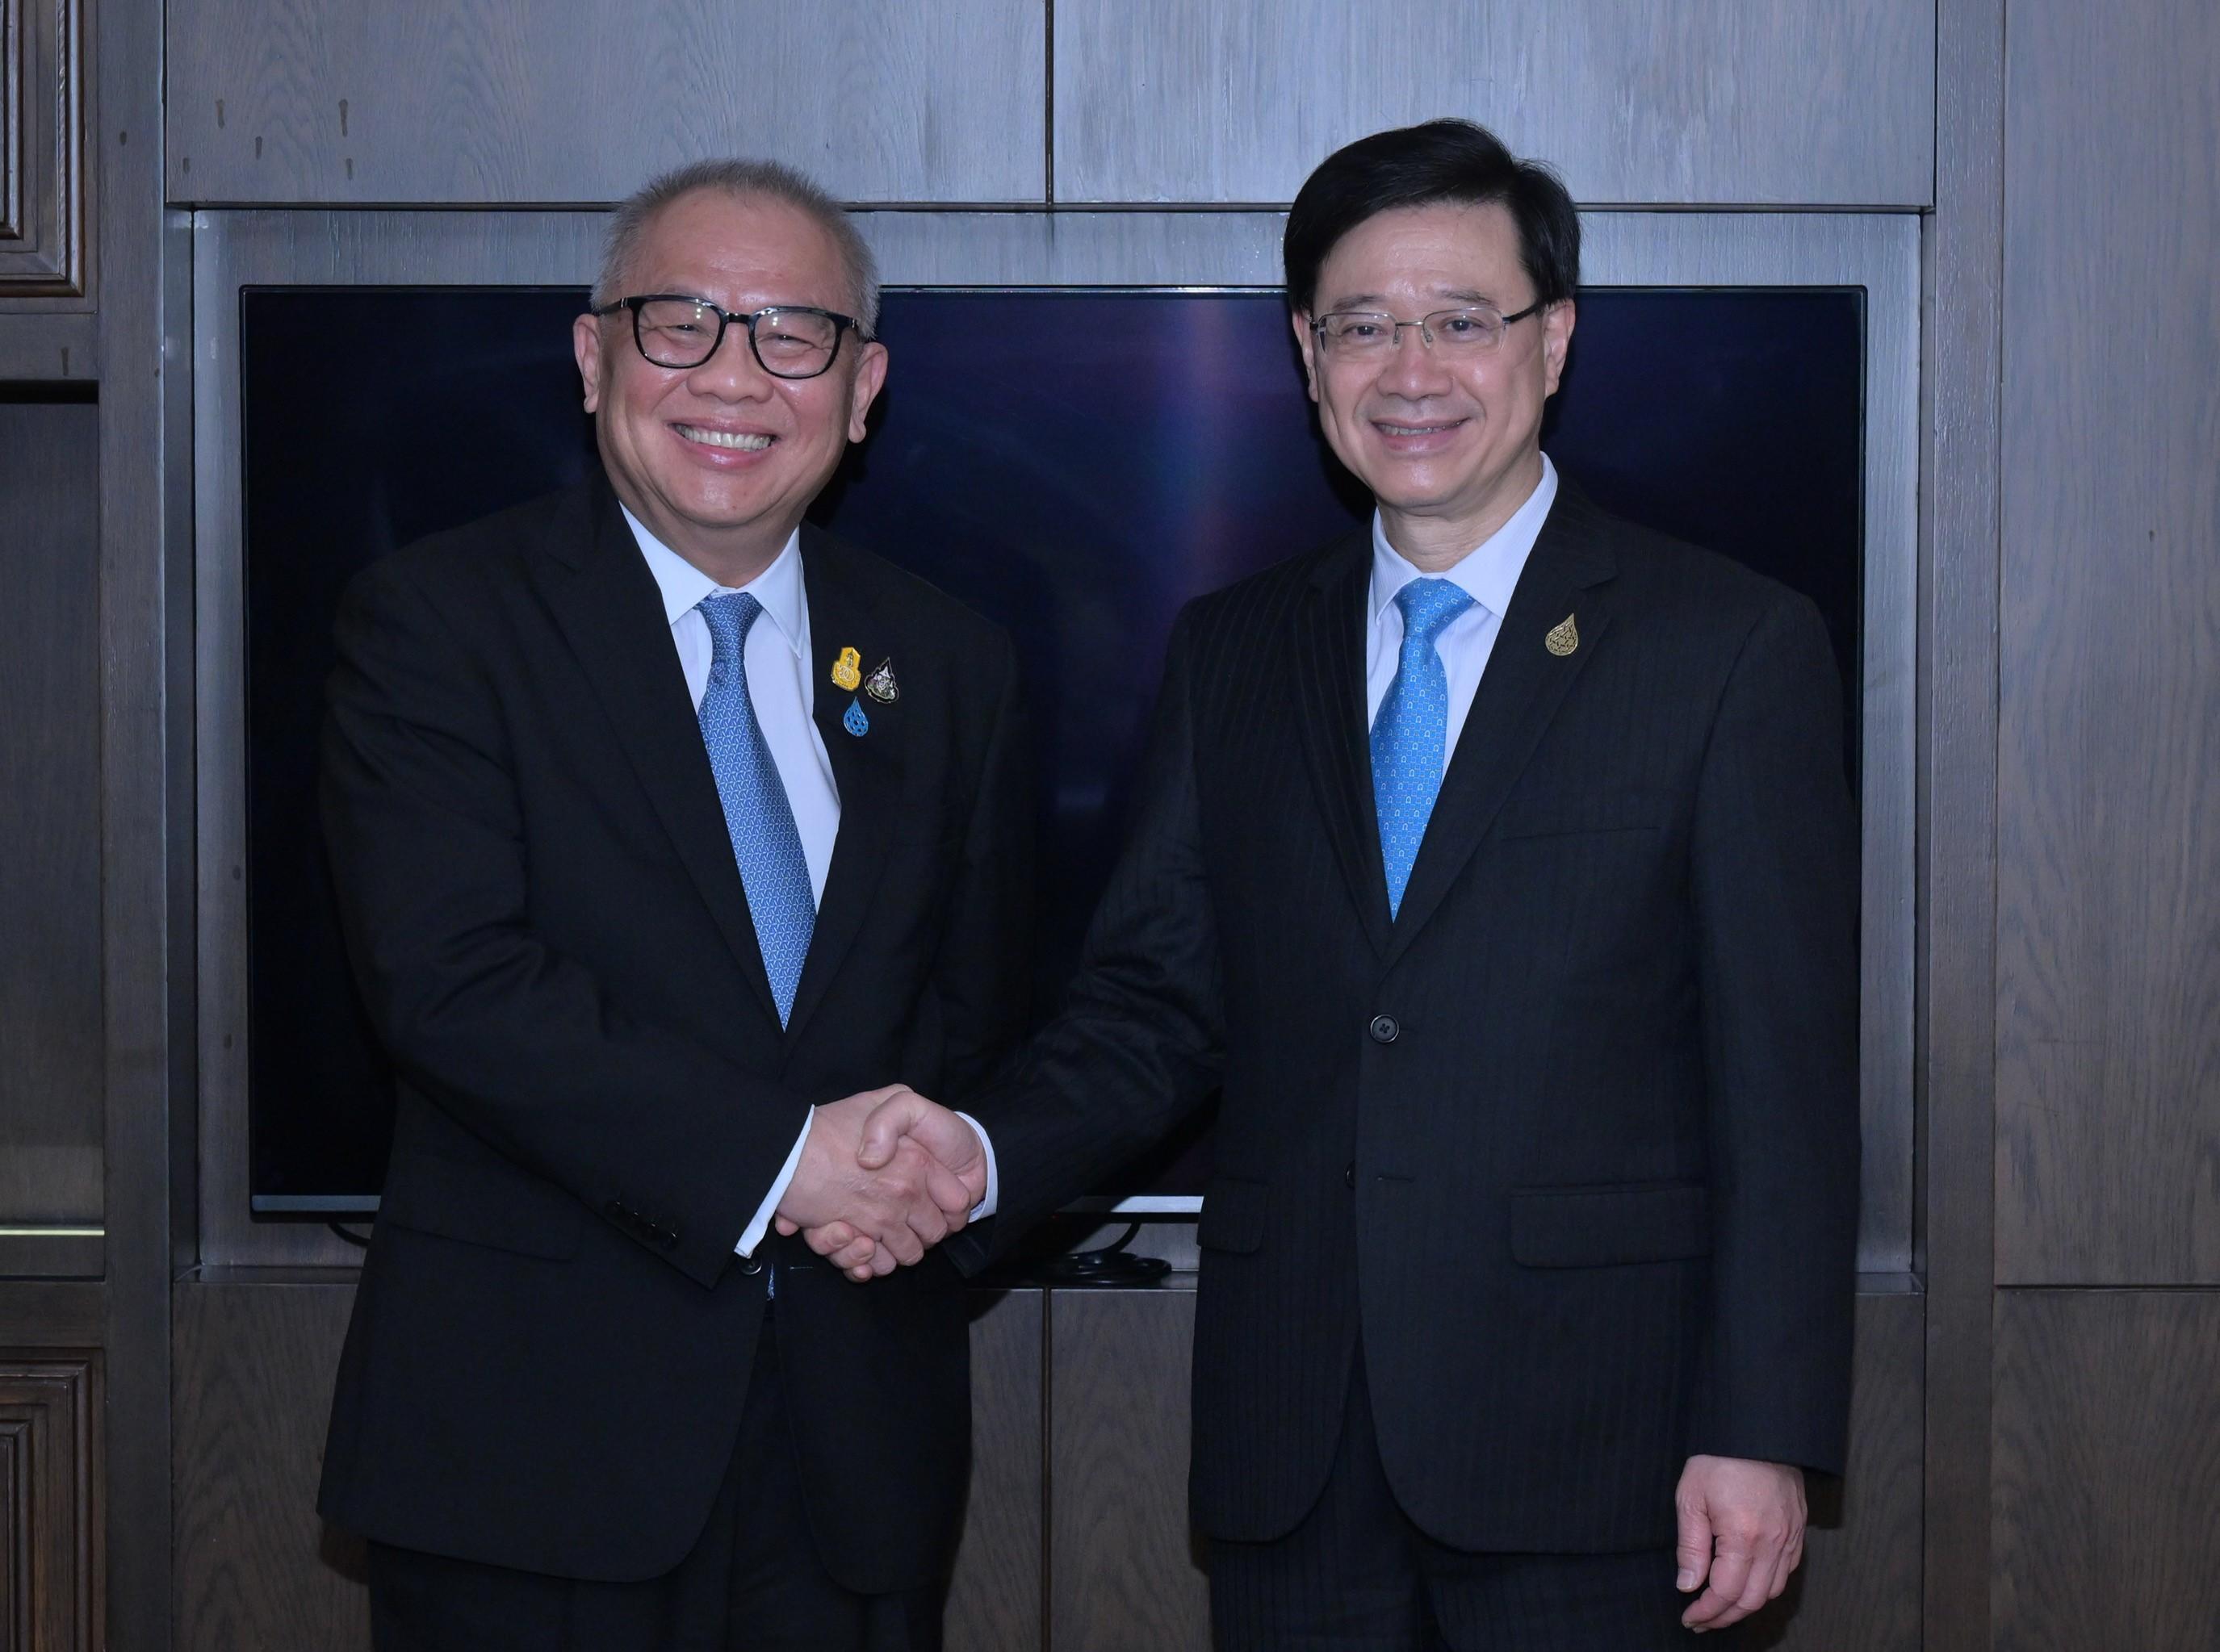 The Chief Executive, Mr John Lee (right), meets with the Deputy Prime Minister and Minister of Energy of Thailand, Mr Supattanapong Punmeechaow (left) in Bangkok, Thailand, today (November 19).